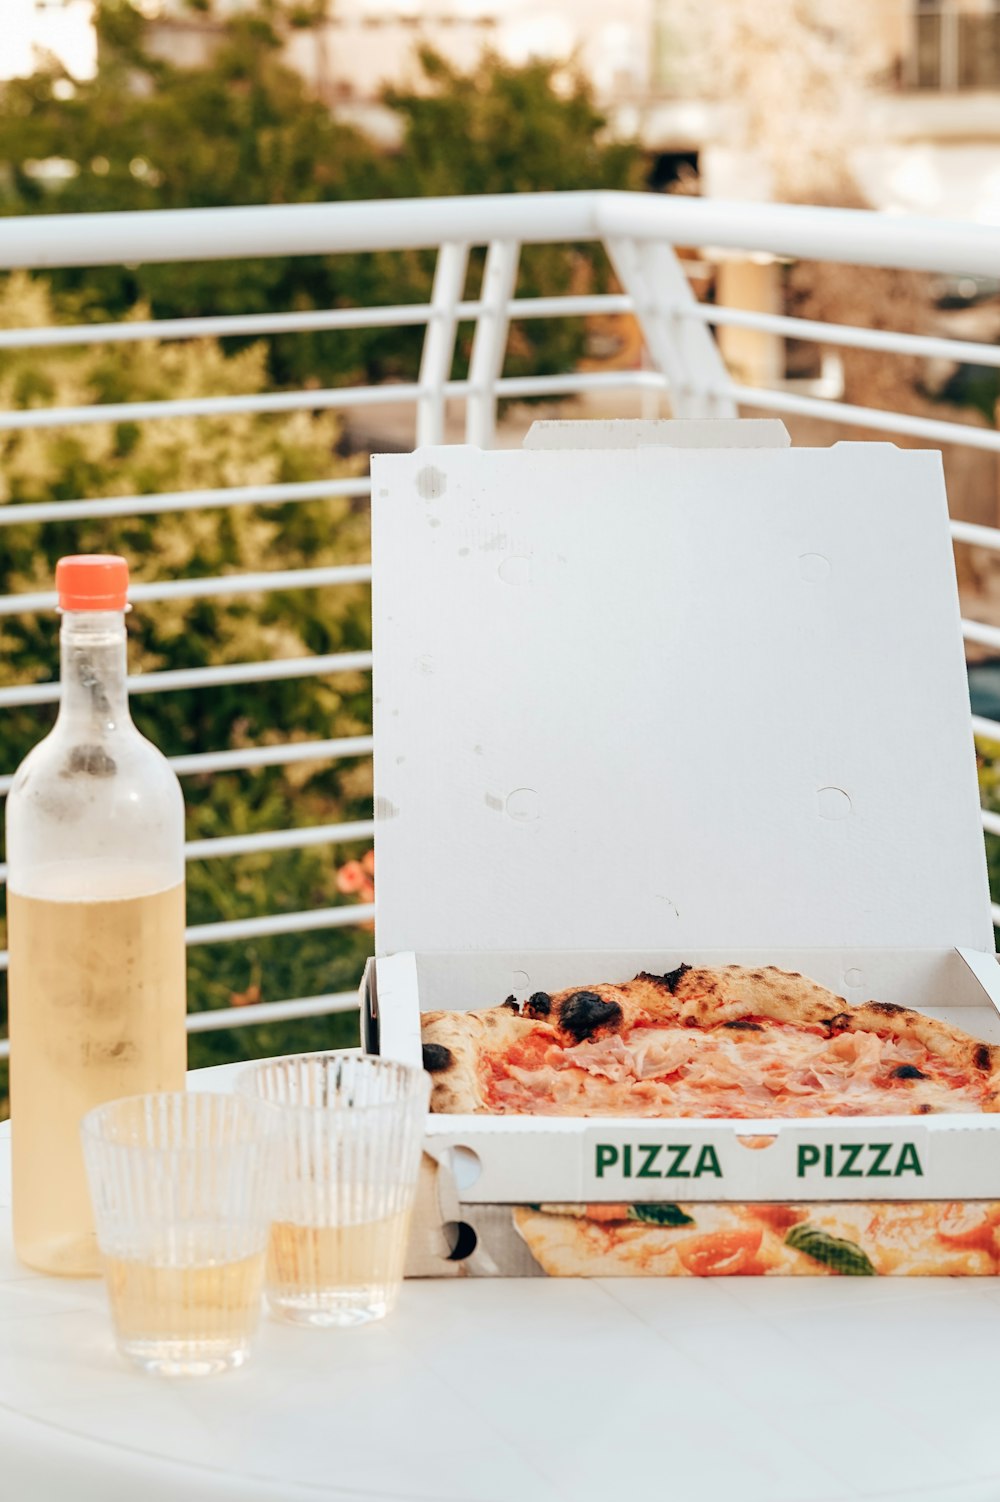 a box of pizza and a bottle of water on a table